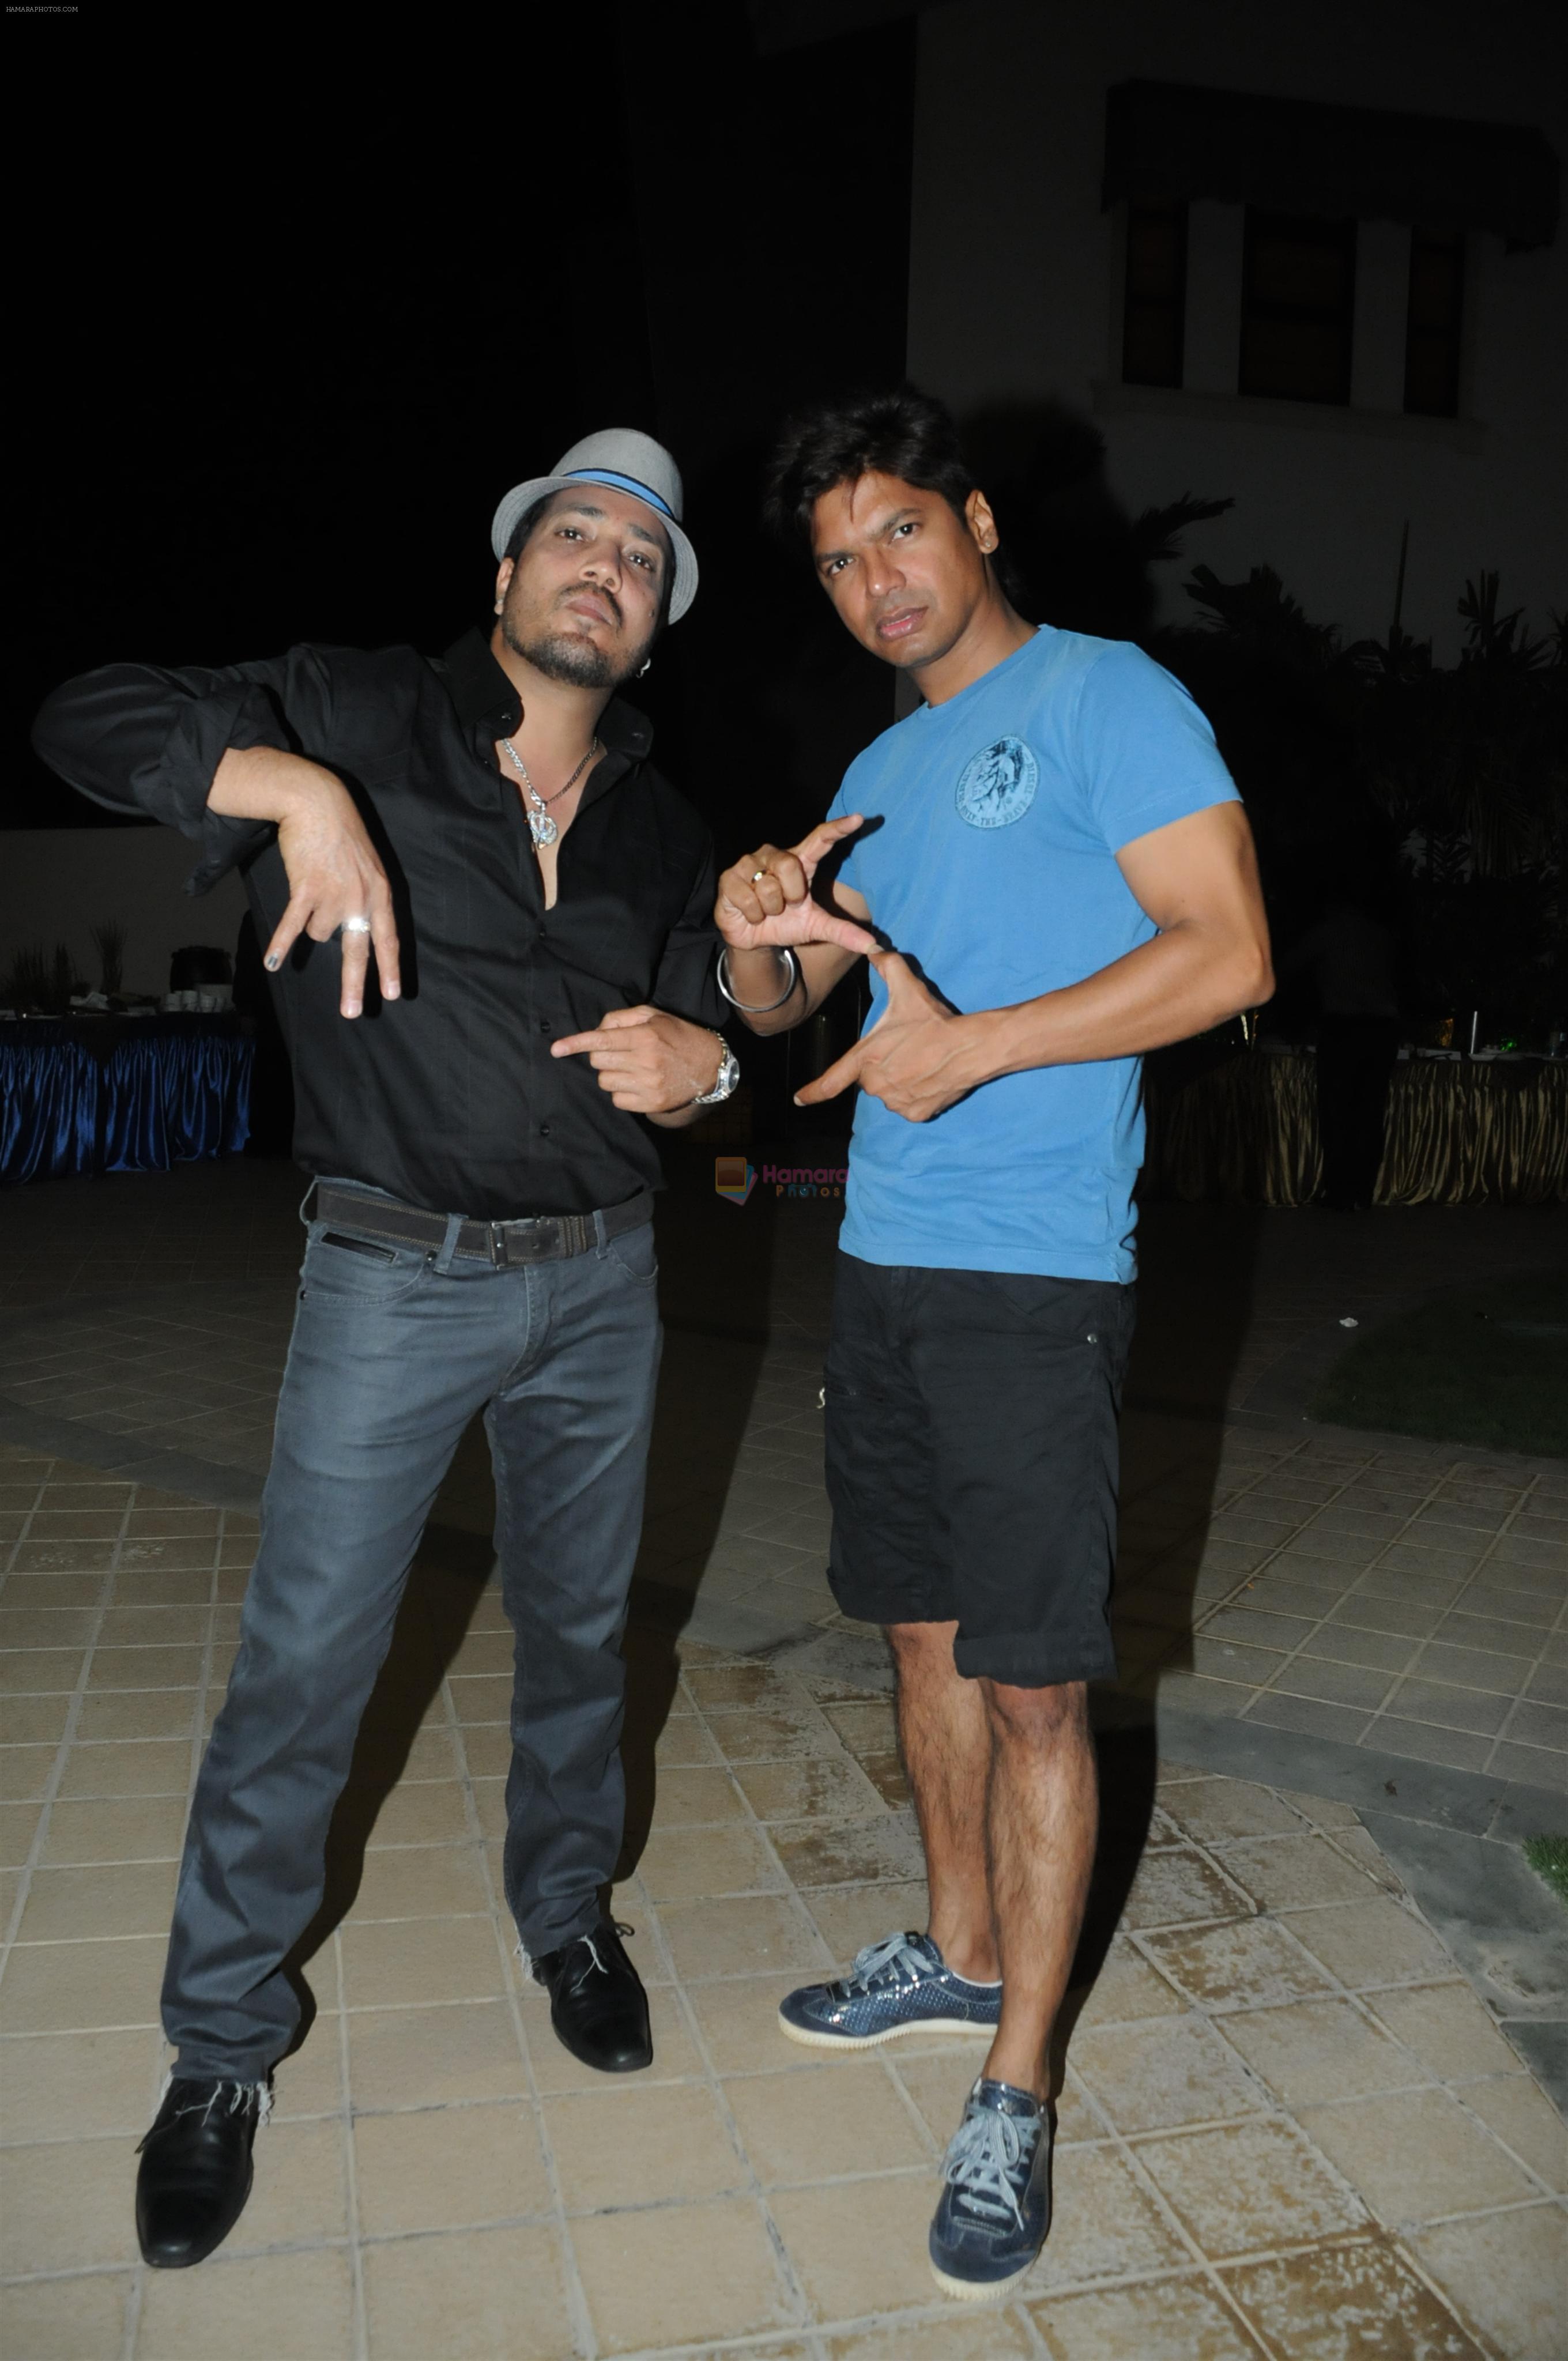 Mika and shaan at Pyaar Ka Bhopu song picturisation completion party on 27th Aug 2012